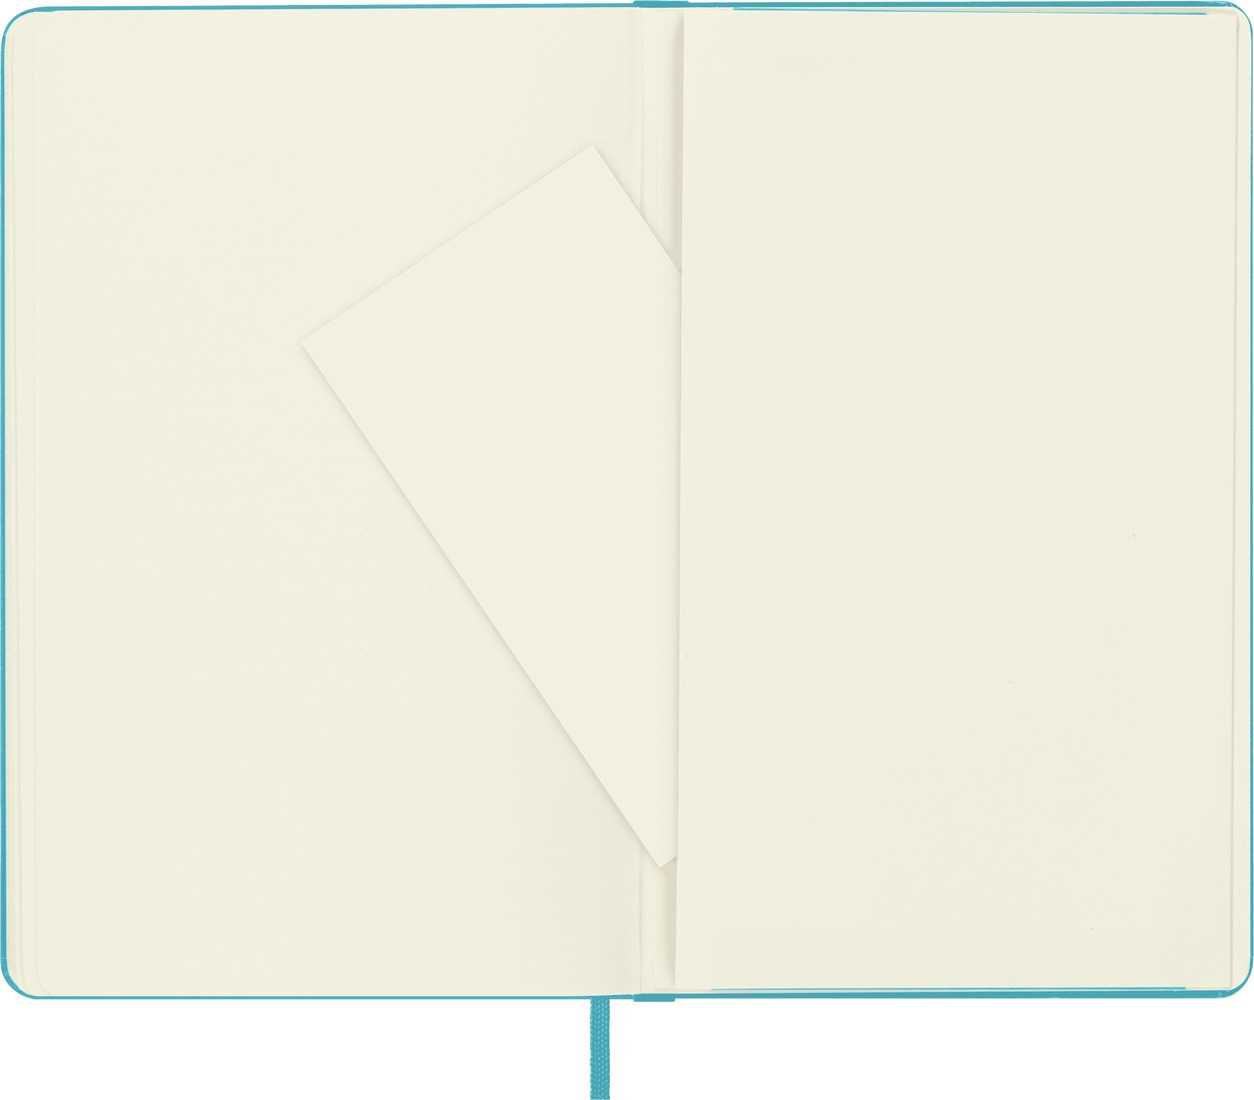 Moleskine Classic Notebook Soft Cover, Reef Blue, soft cover, plain, large 13x21